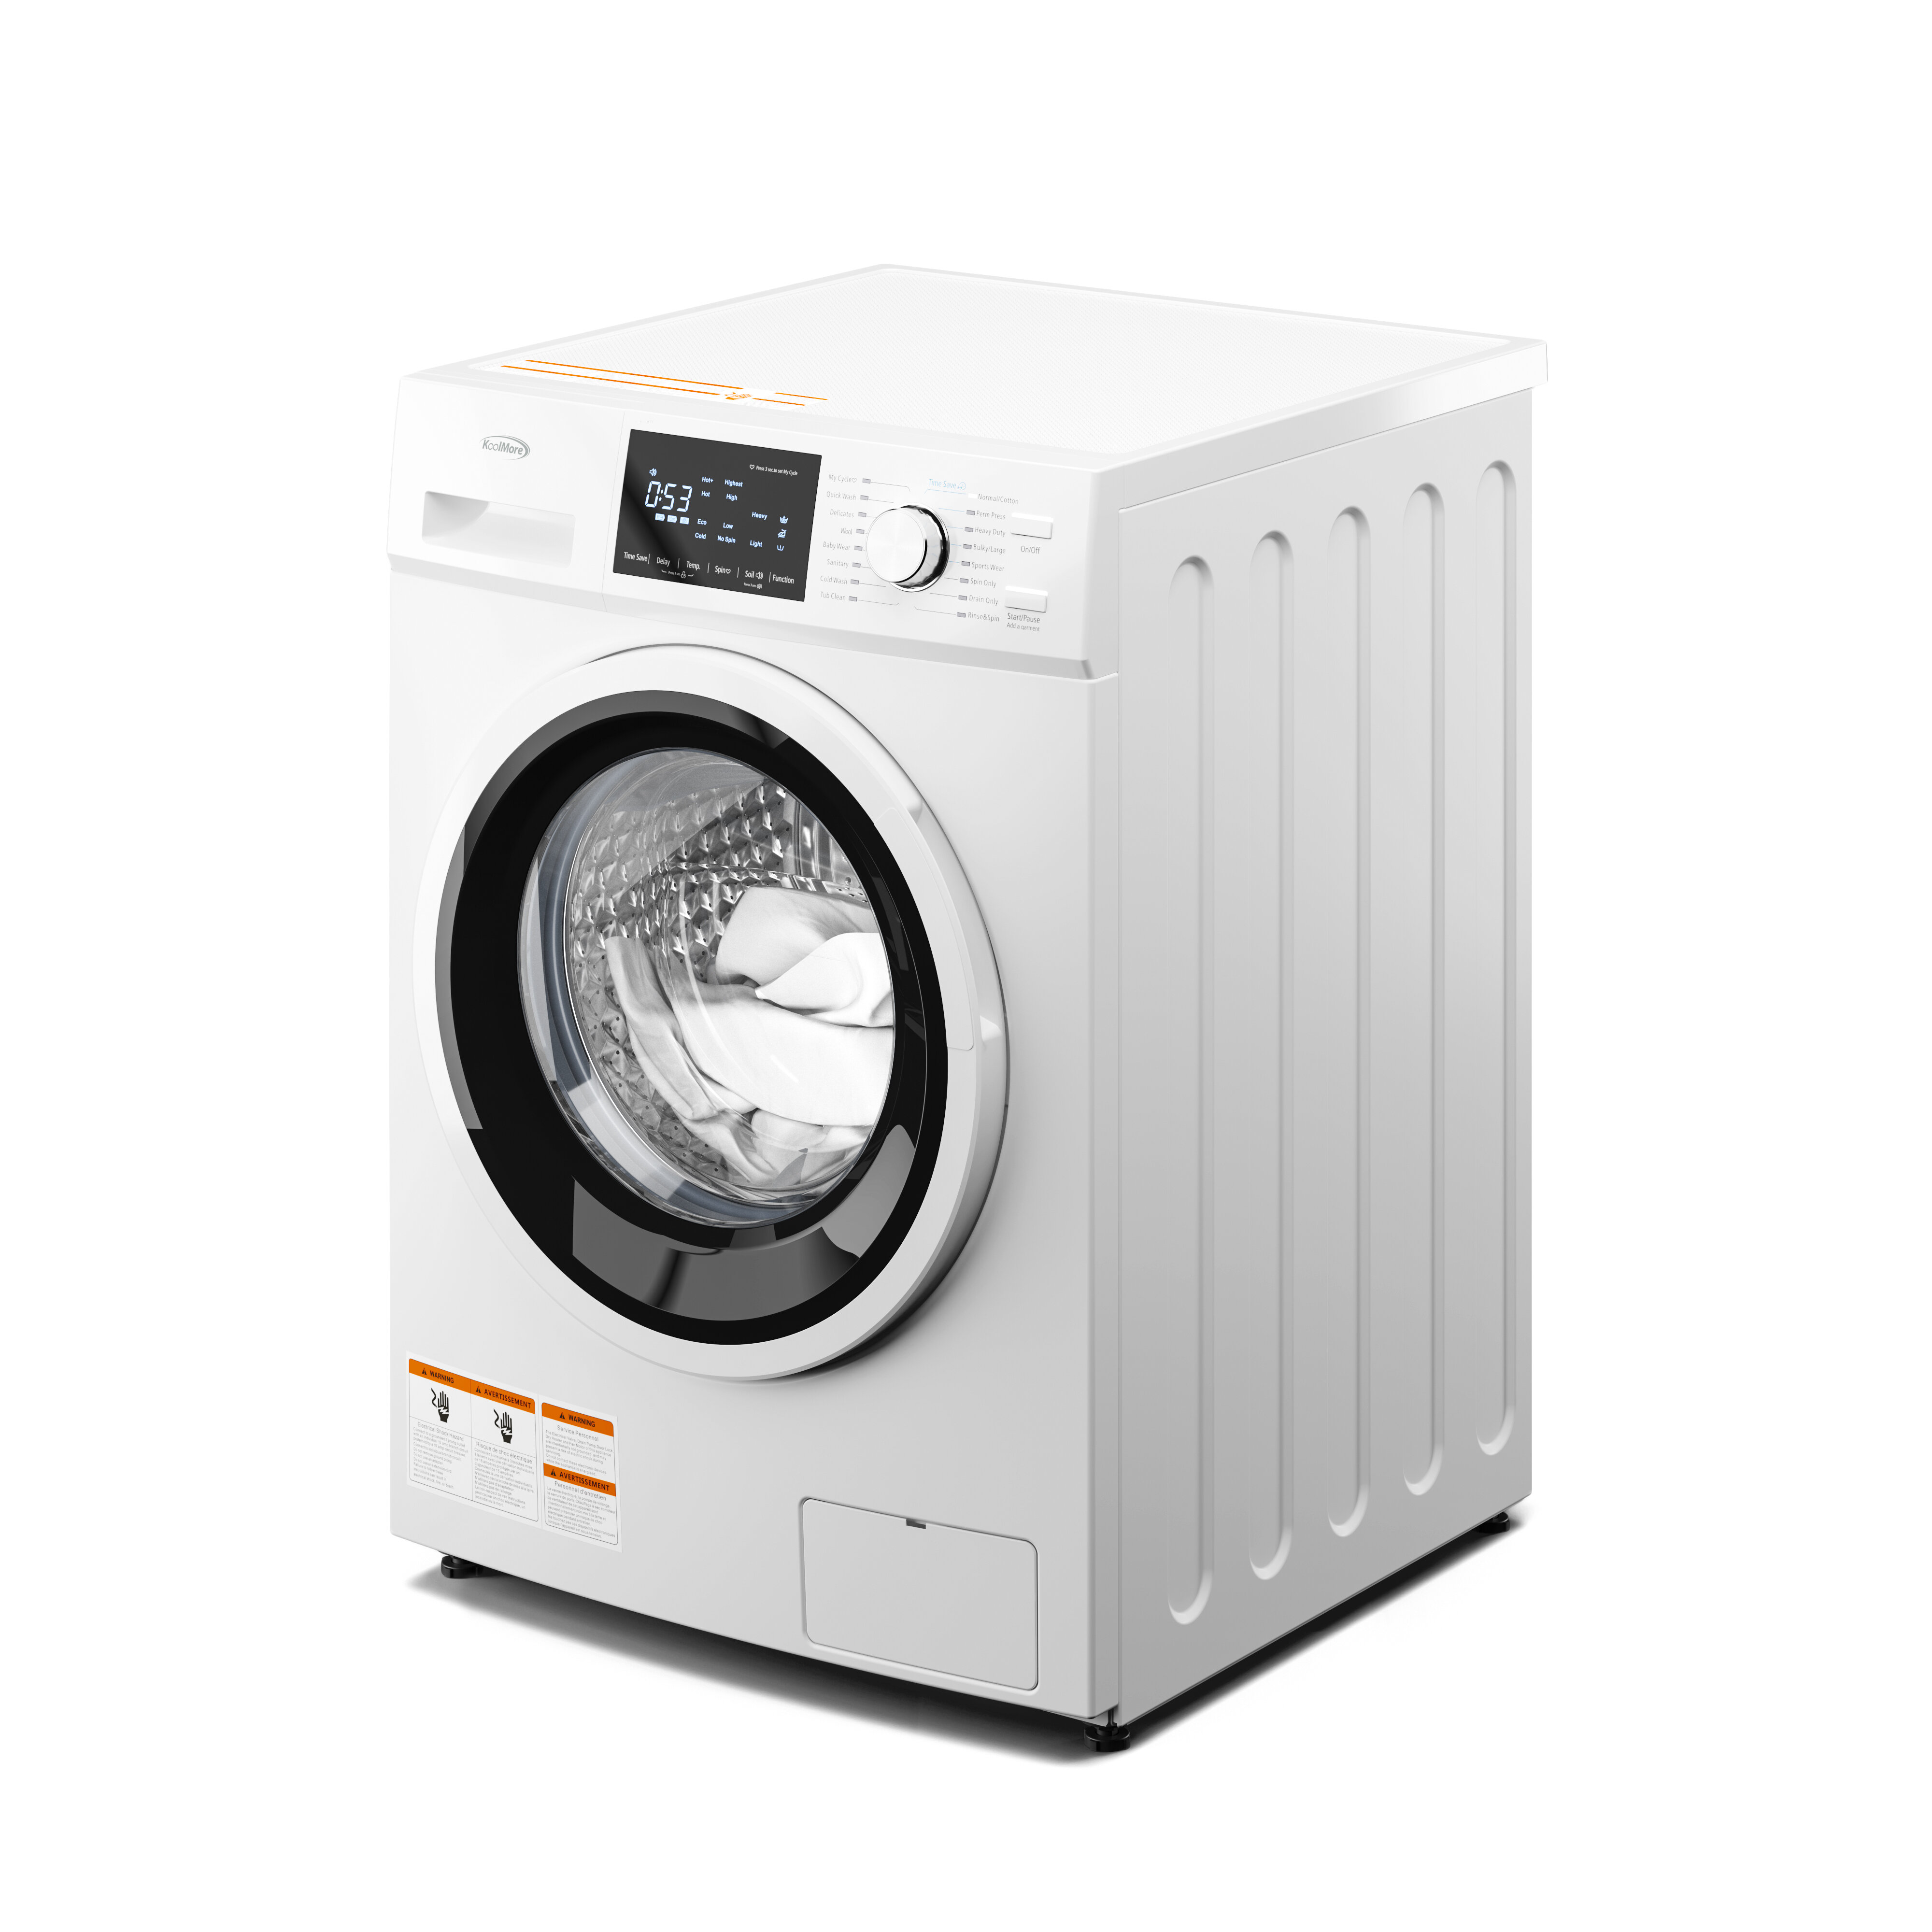 2.7 cu. Ft. Front Load Washer with 16 cycles in Compact White